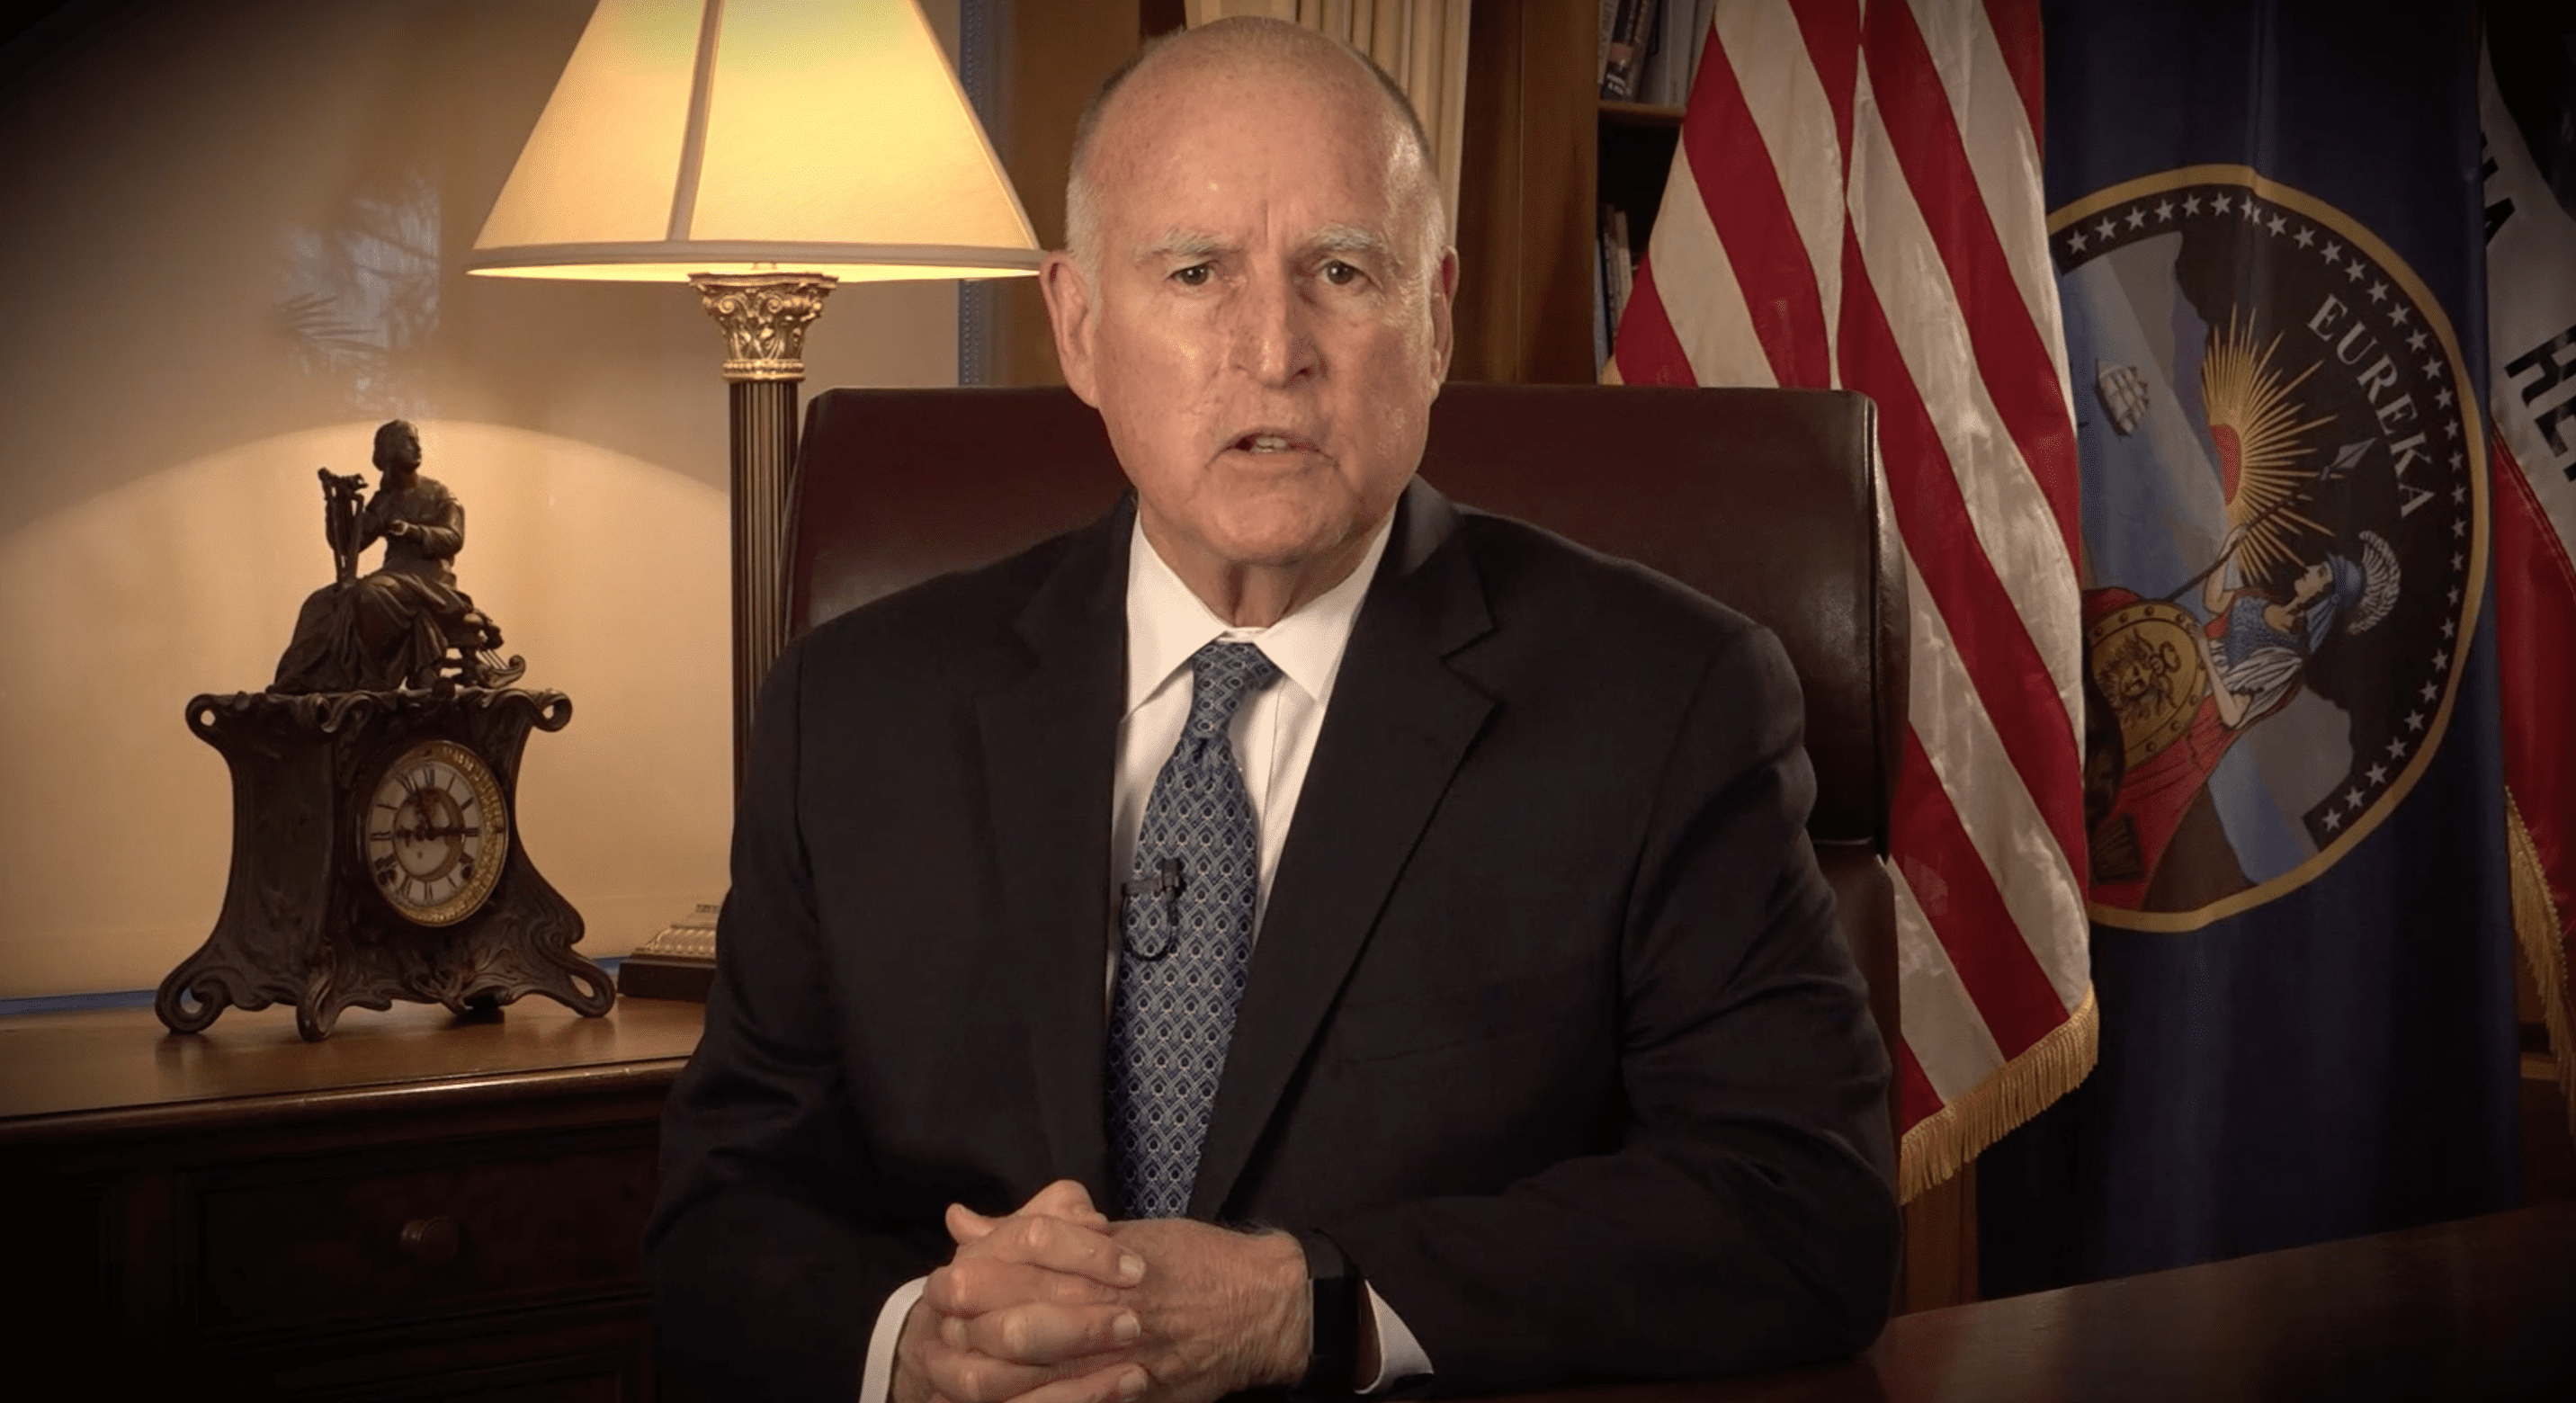 Governor Brown to World Leaders at the Close of COP24: “Wake Up!”